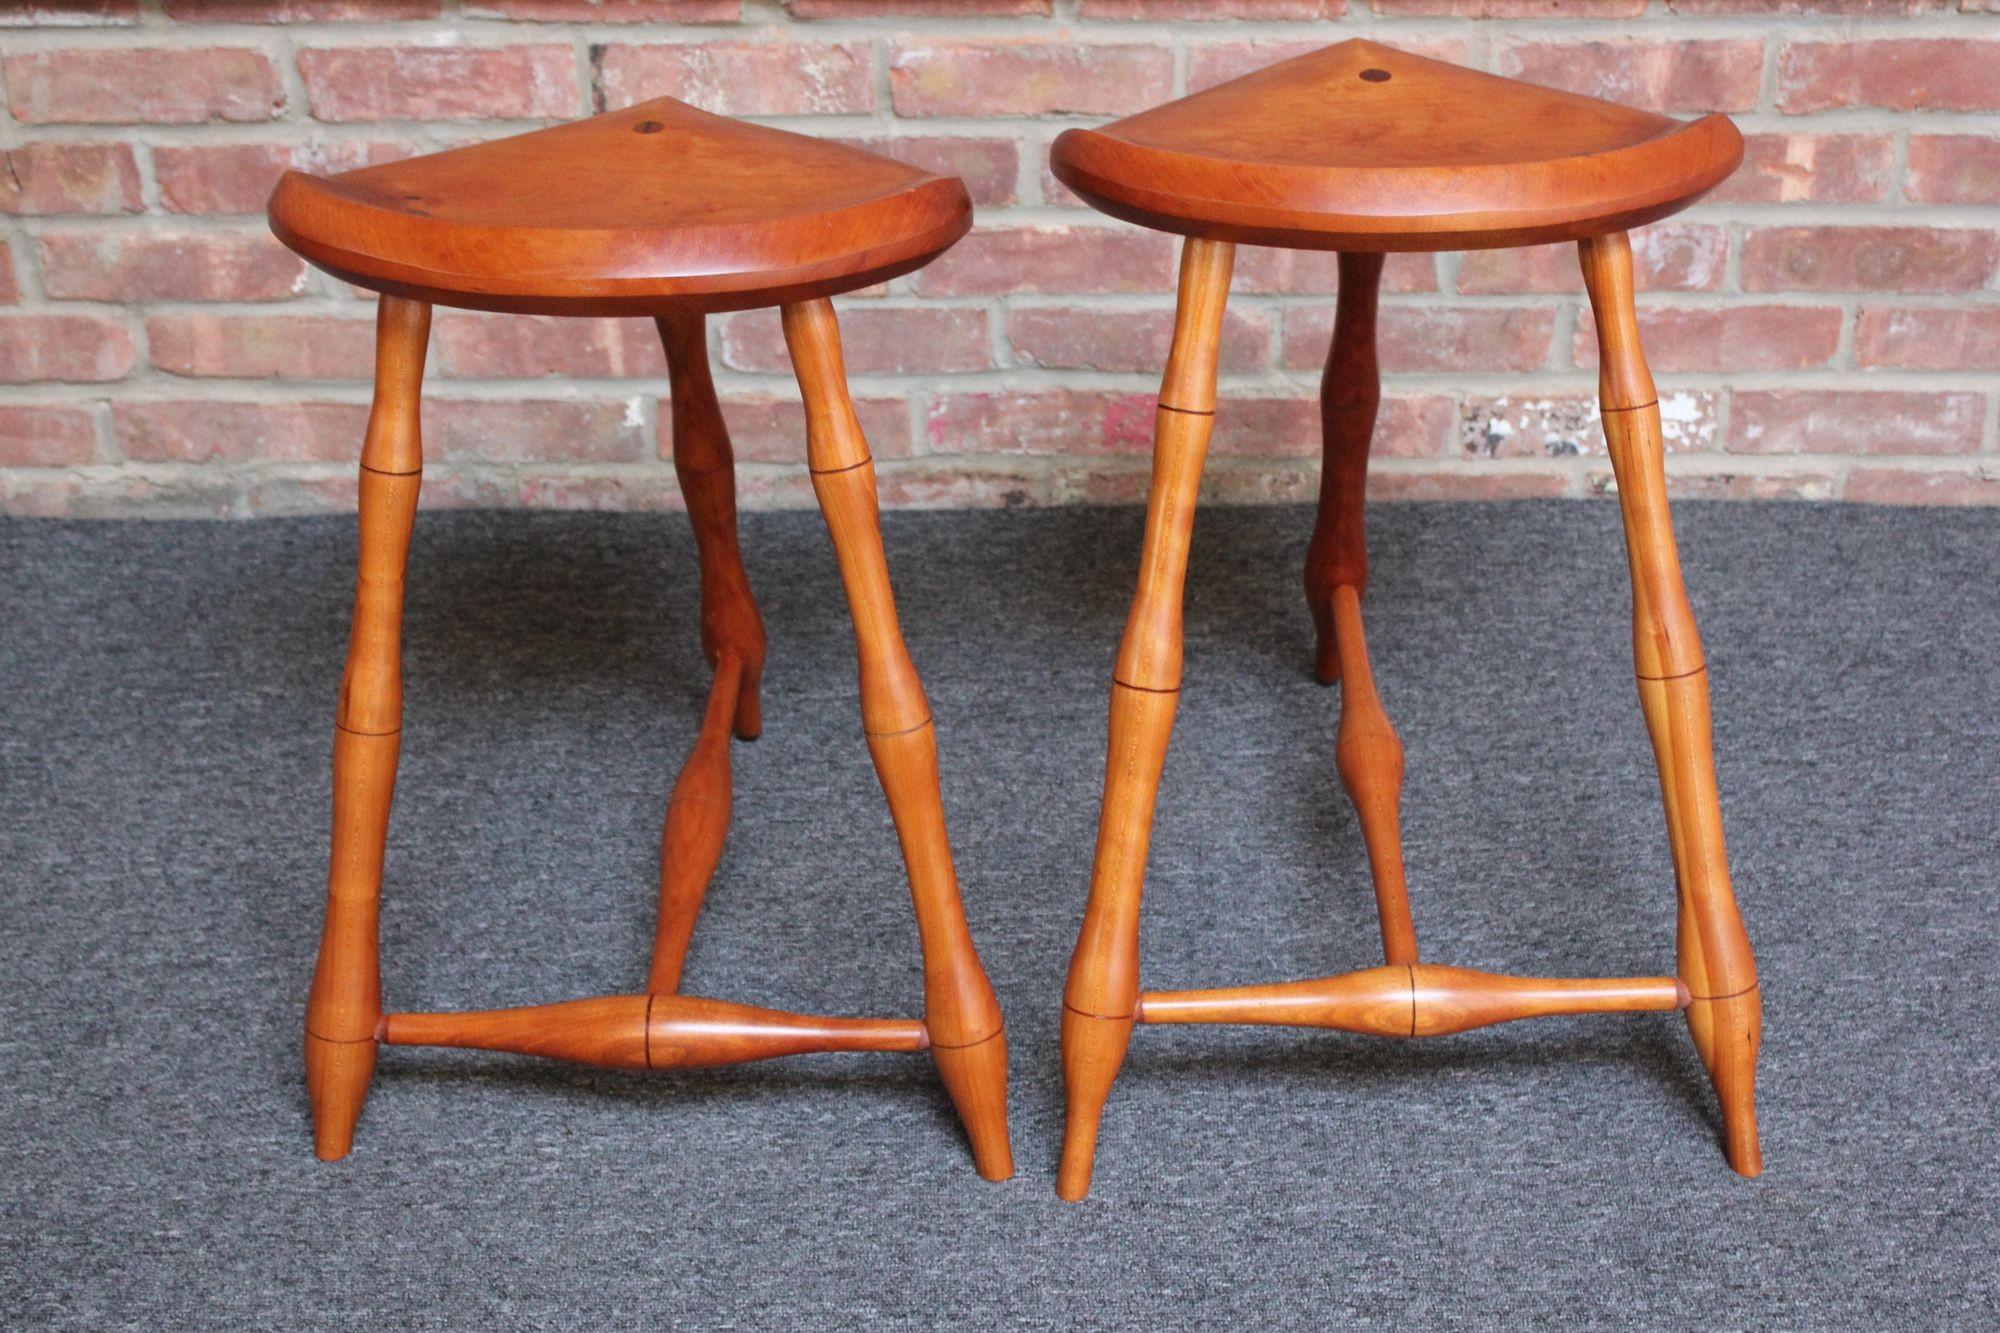 Pair of Vintage Studio Craft Windsor-Style Three Legged Low Stools in Cherrywood In Good Condition For Sale In Brooklyn, NY